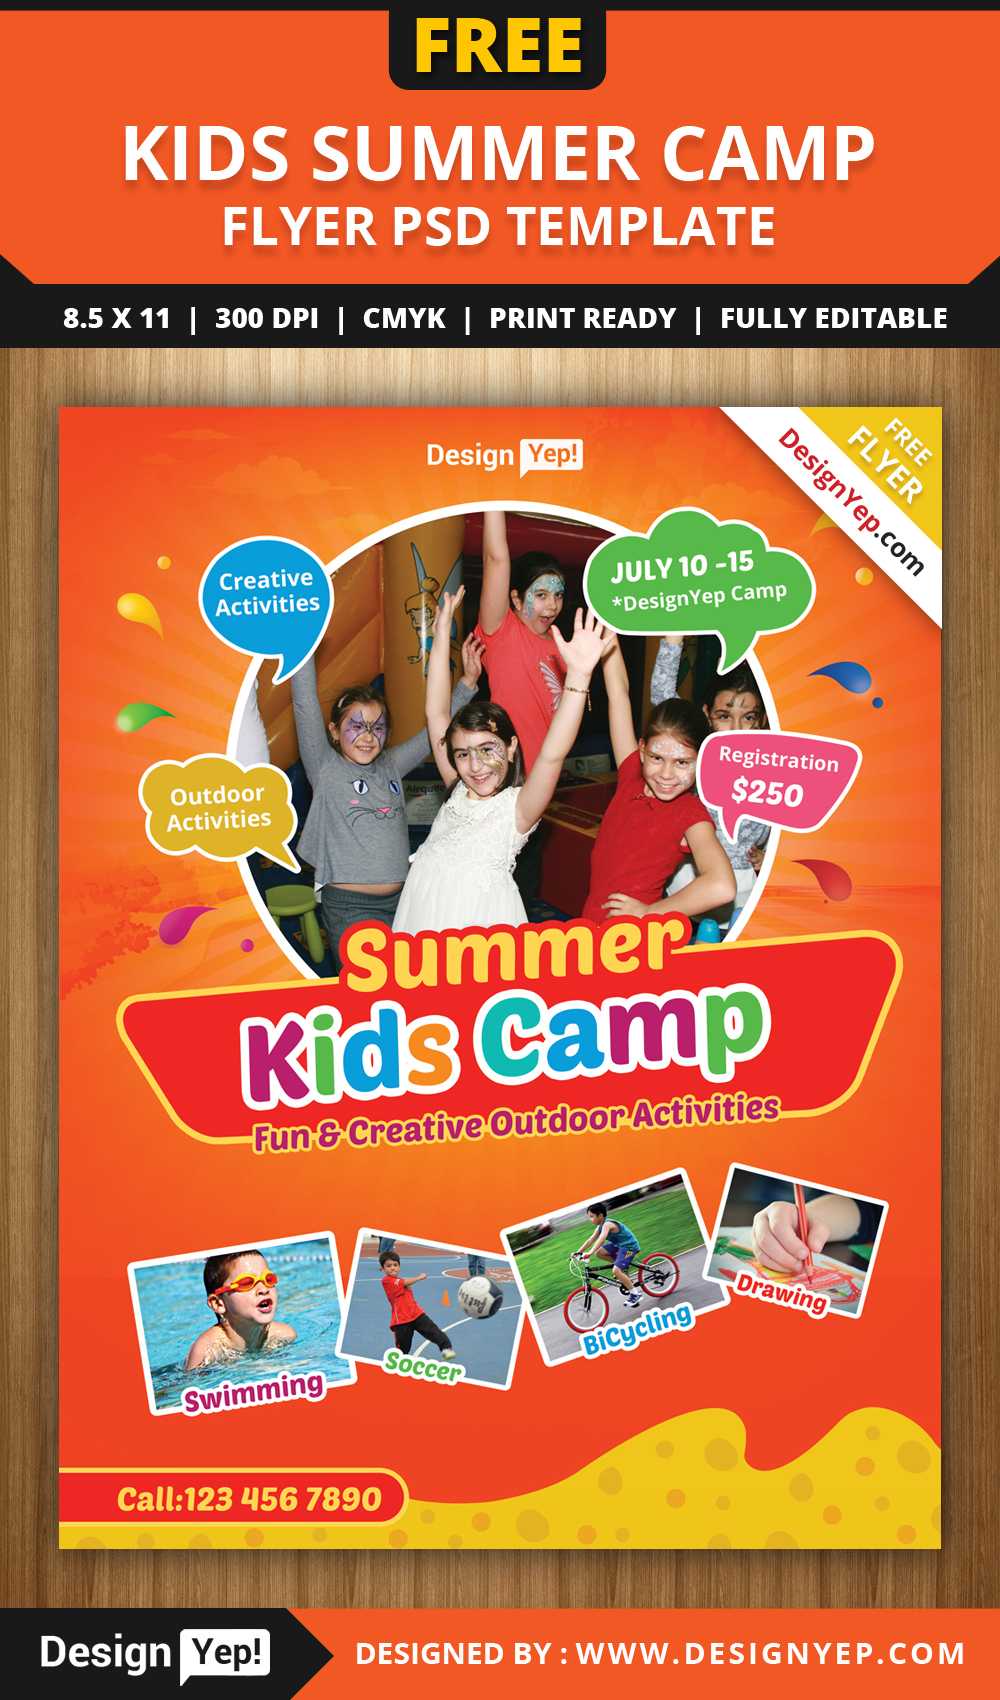 Free Kids Summer Camp Flyer Psd Template On Behance For Summer Camp Brochure Template Free Download